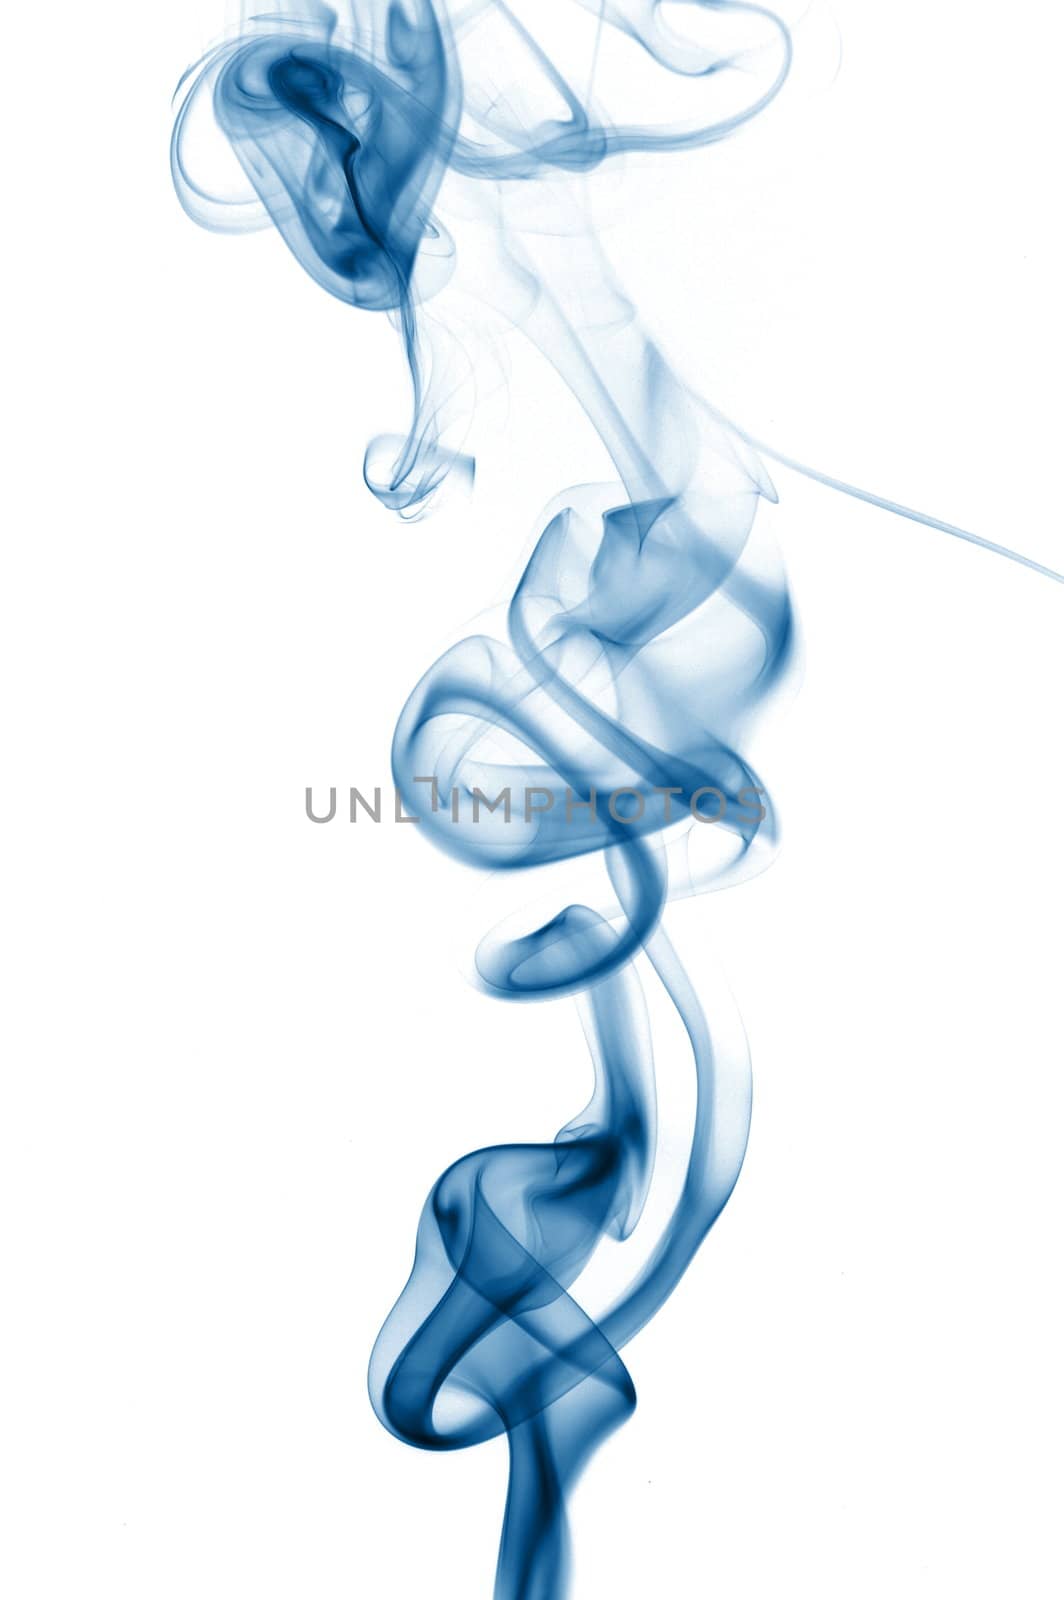 abstract smoke background by gunnar3000